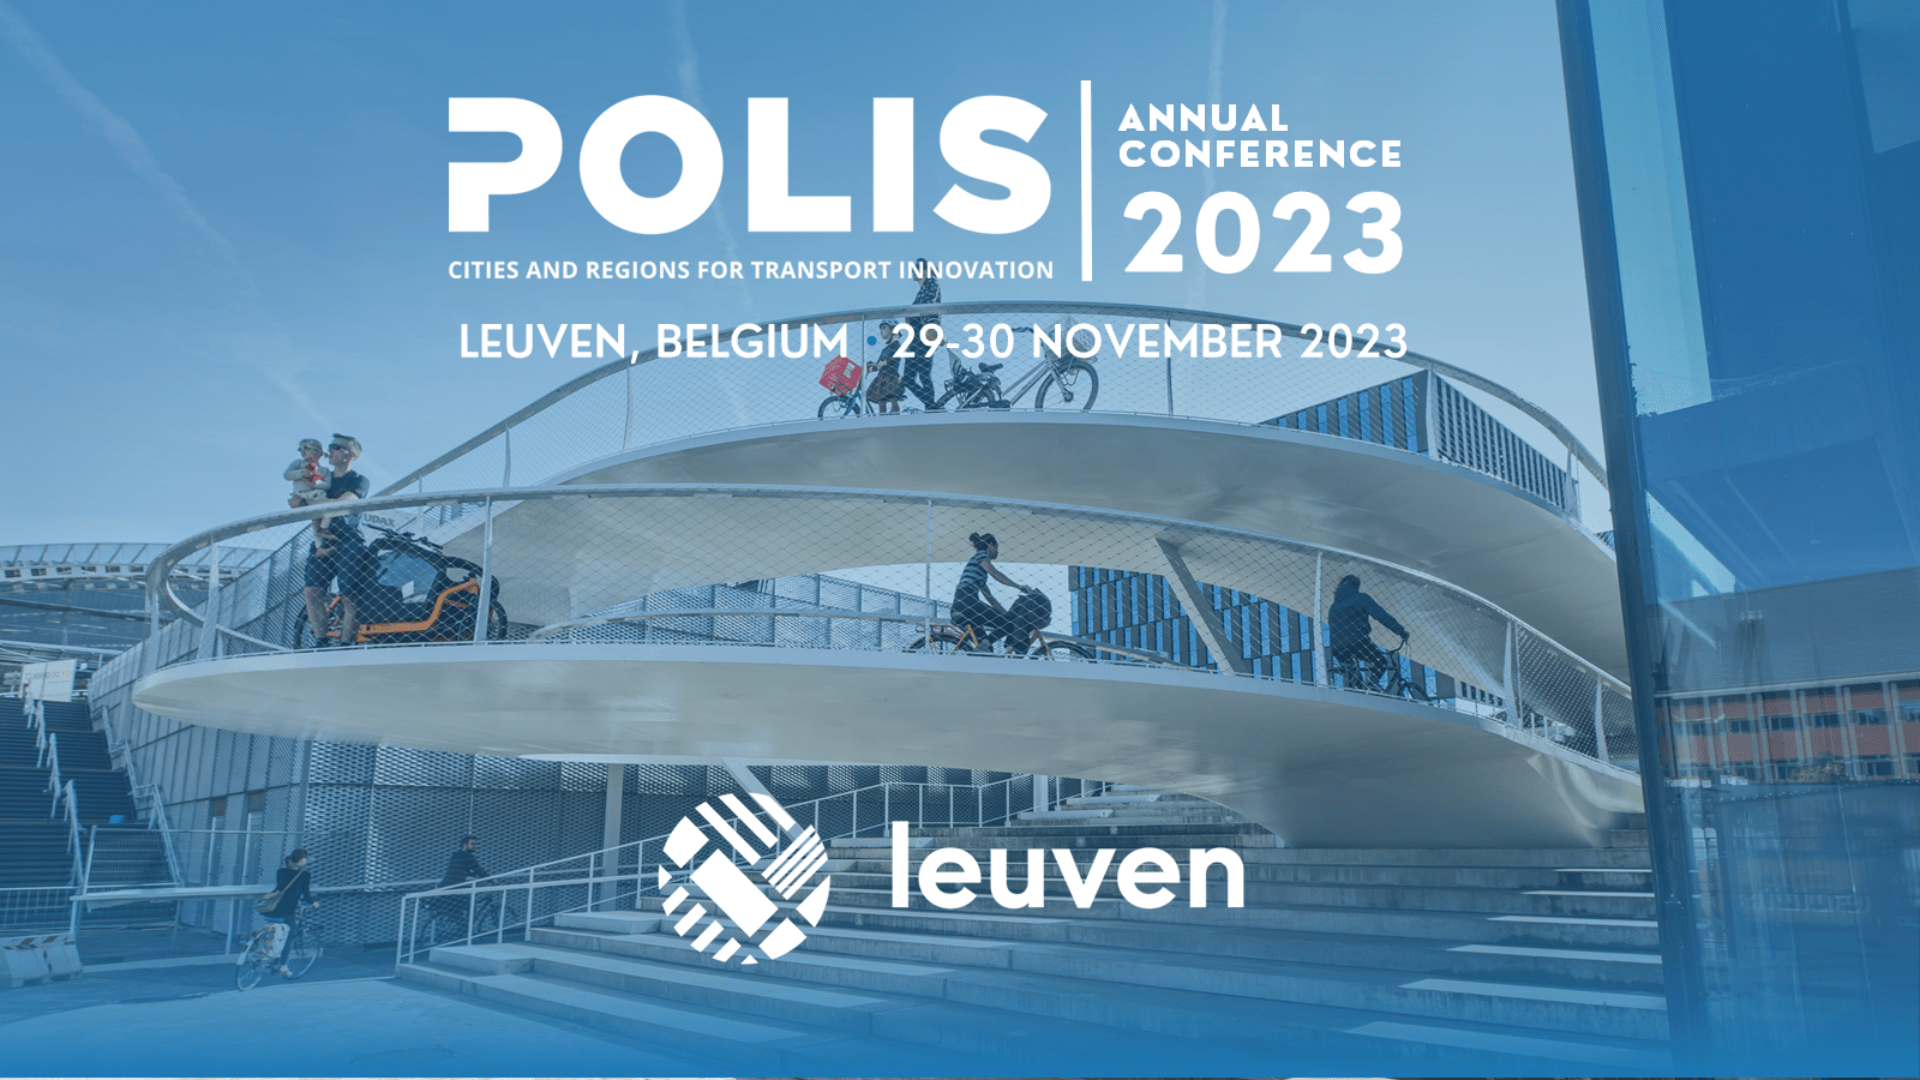 Annual POLIS Conference I 29-30 November: Paola Cossu, CEO FIT, will moderate the panel “WHEN URBAN PLANNING MEETS LOGISTICS: PATHWAYS TO SULPS”